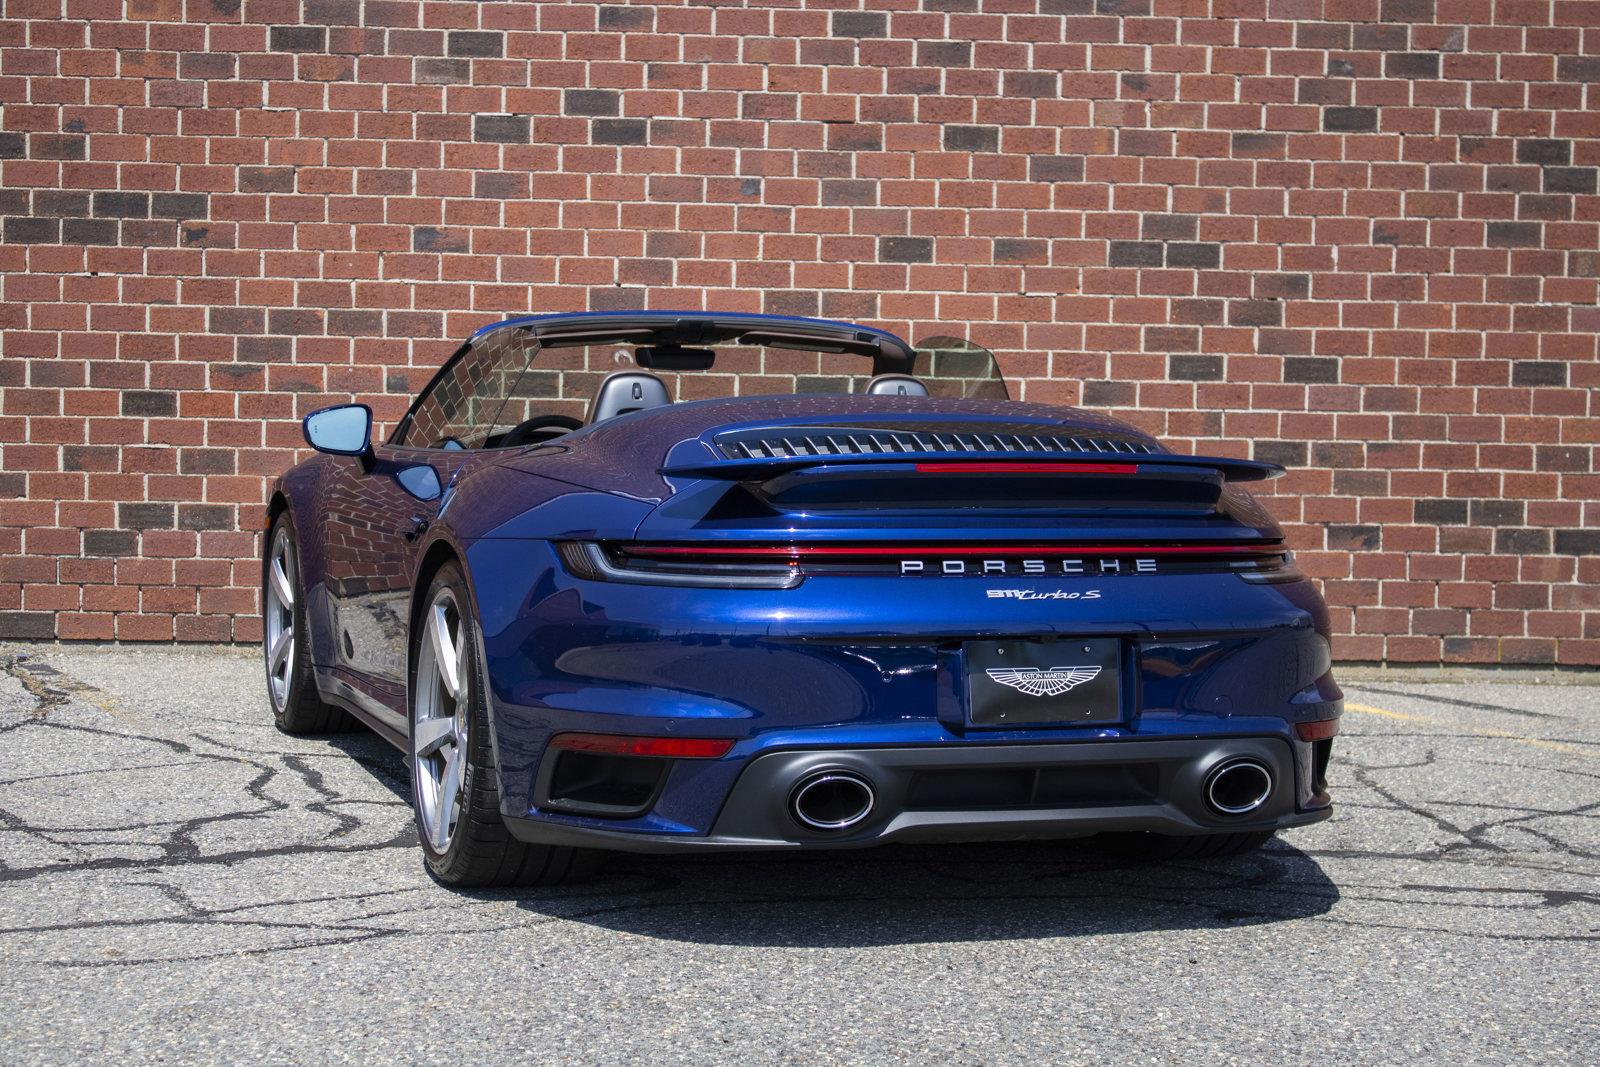 Used 2021 Porsche 911 Turbo S with VIN WP0CD2A90MS263223 for sale in Norwood, MA